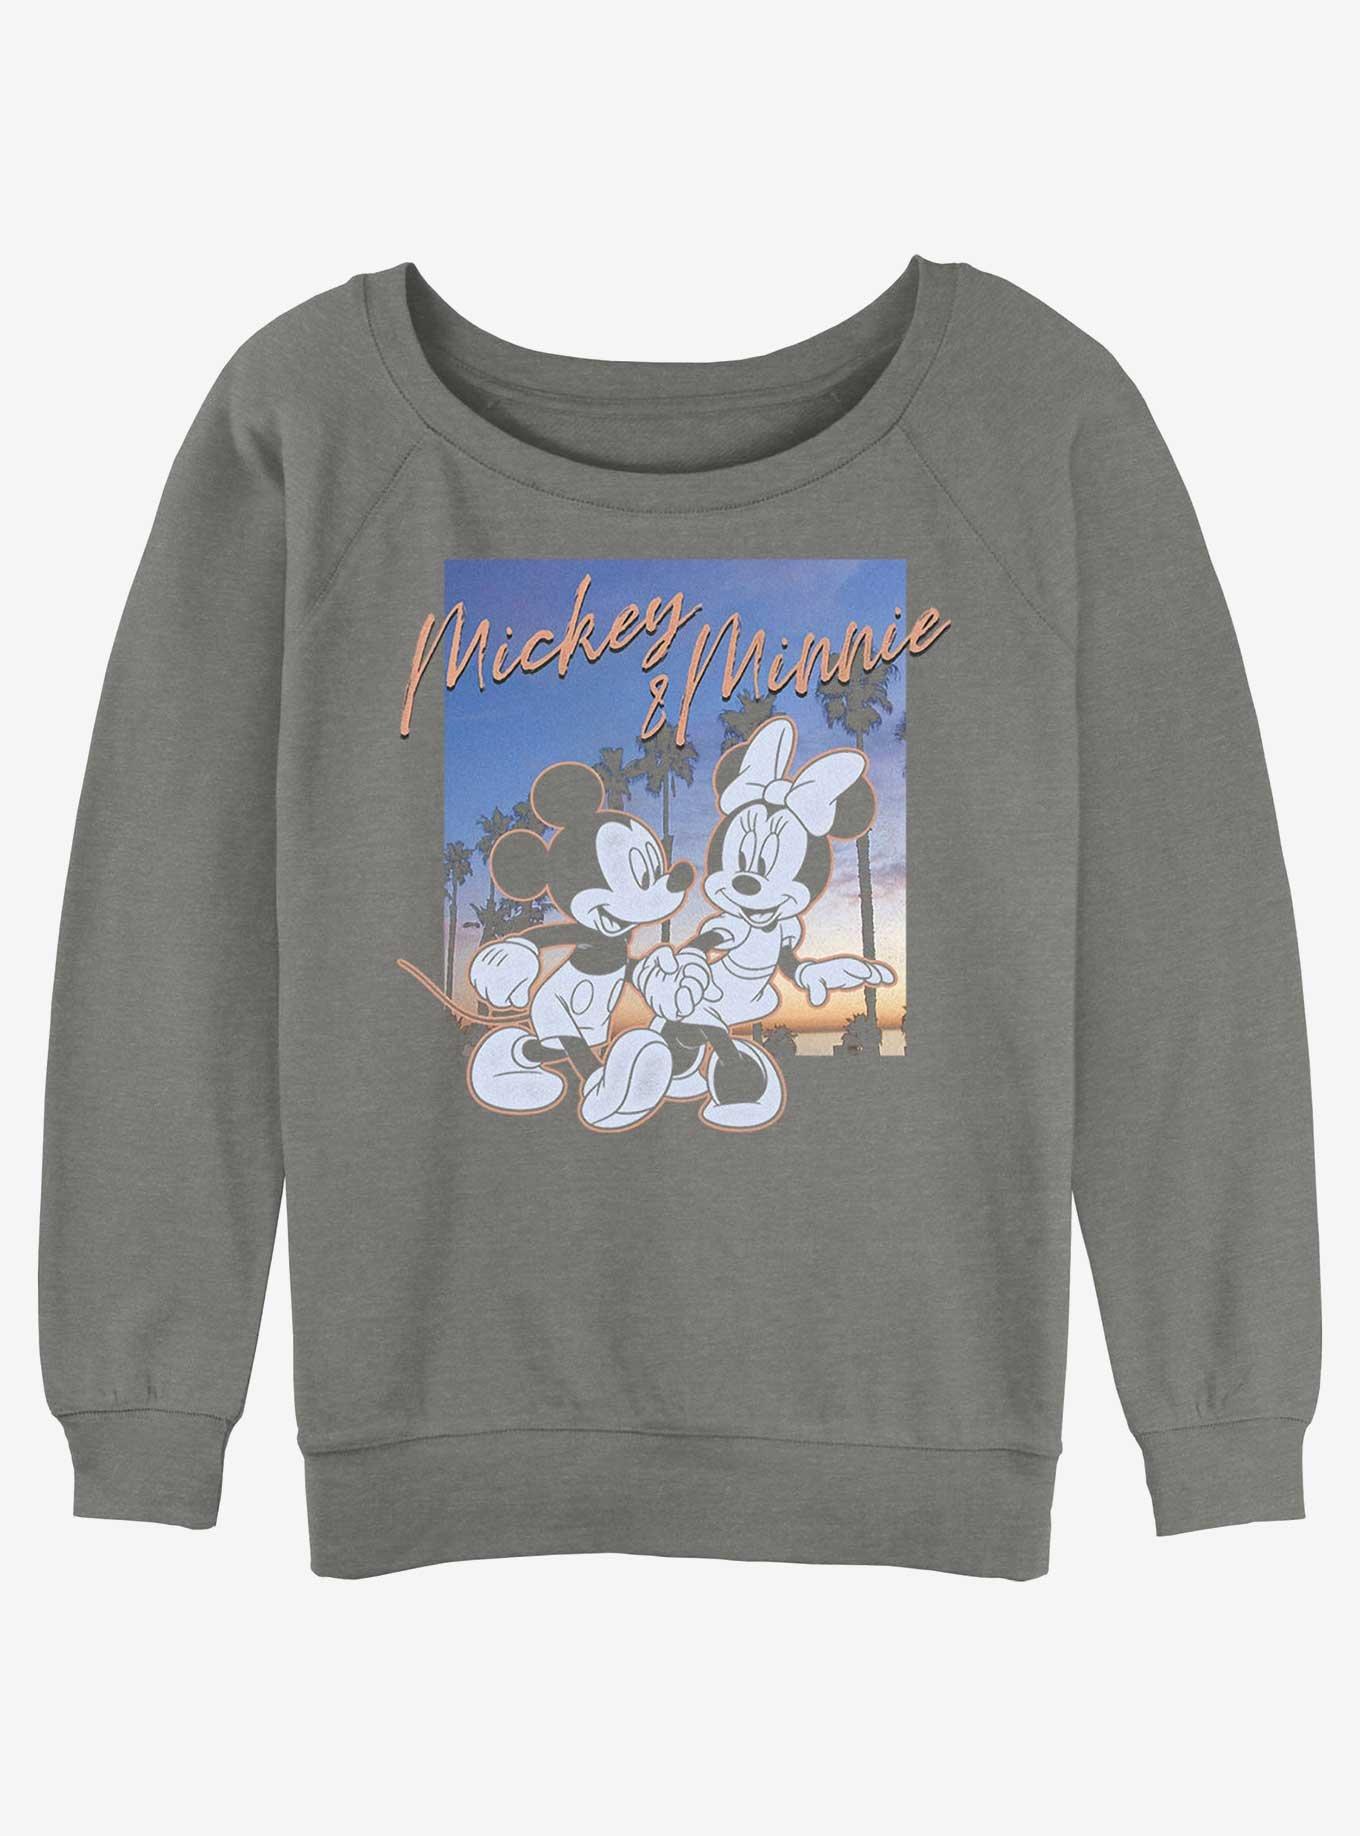 Disney Mickey Mouse & Minnie Mouse Sunset Couple Girls Slouchy Sweatshirt, GRAY HTR, hi-res